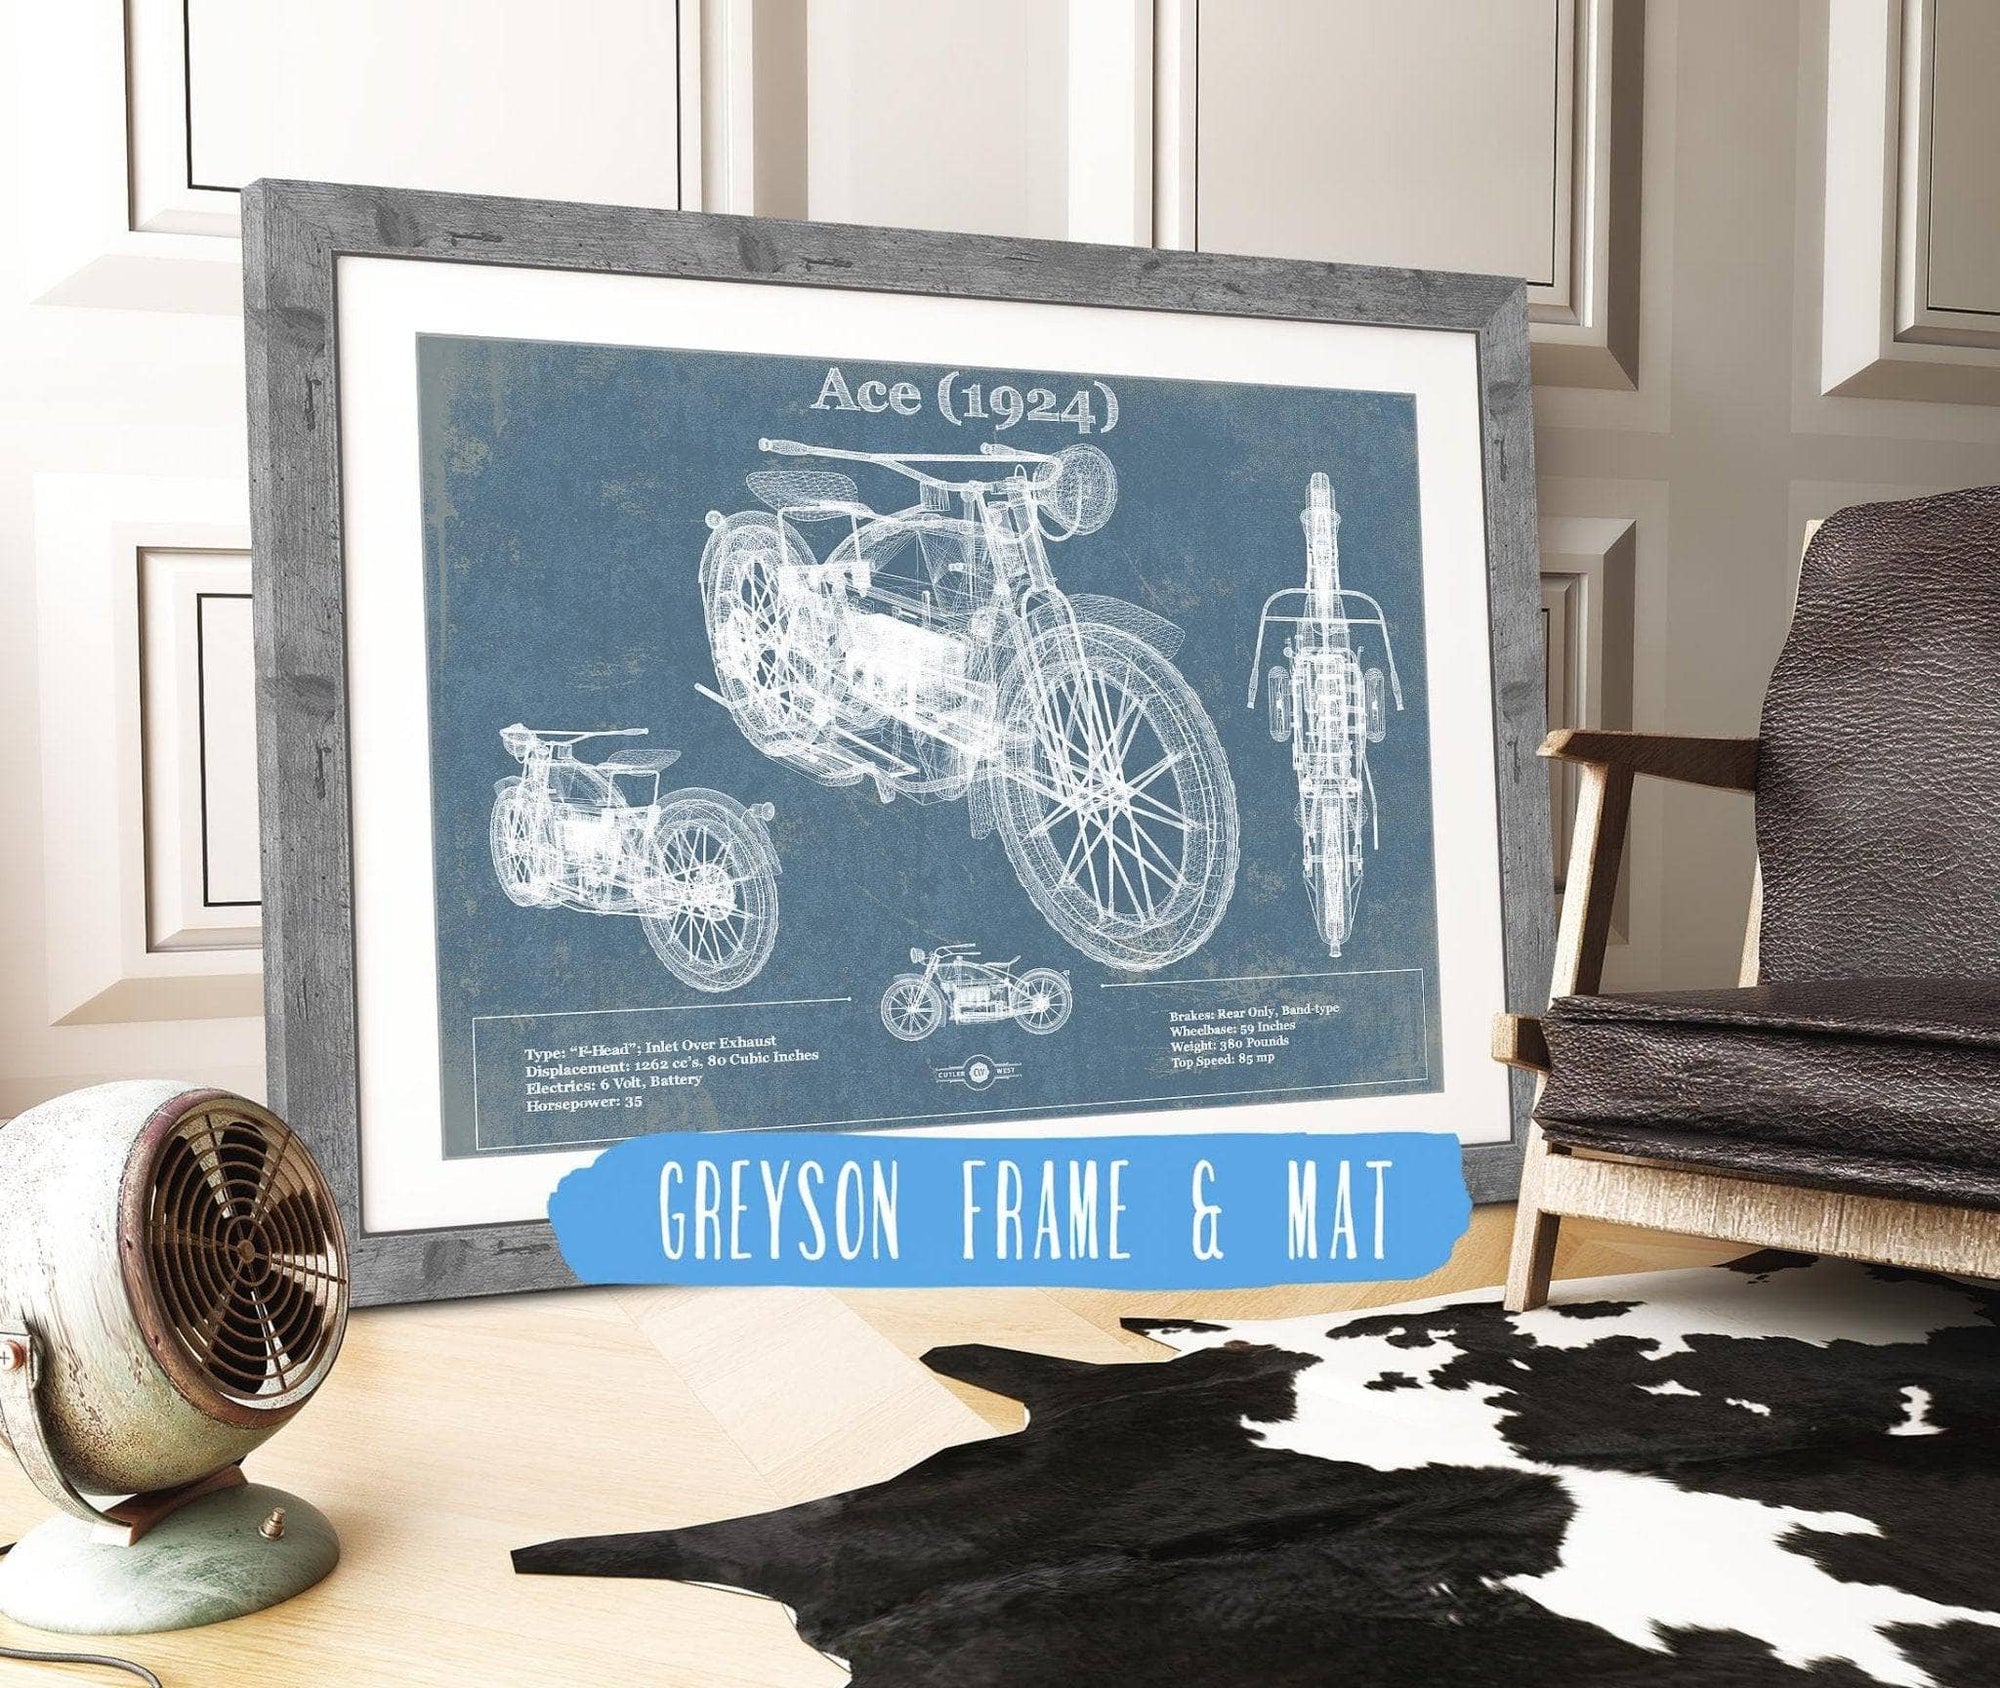 Cutler West Vehicle Collection 14" x 11" / Greyson Frame & Mat Ace (1924) Blueprint Motorcycle Patent Print 833110074_38911